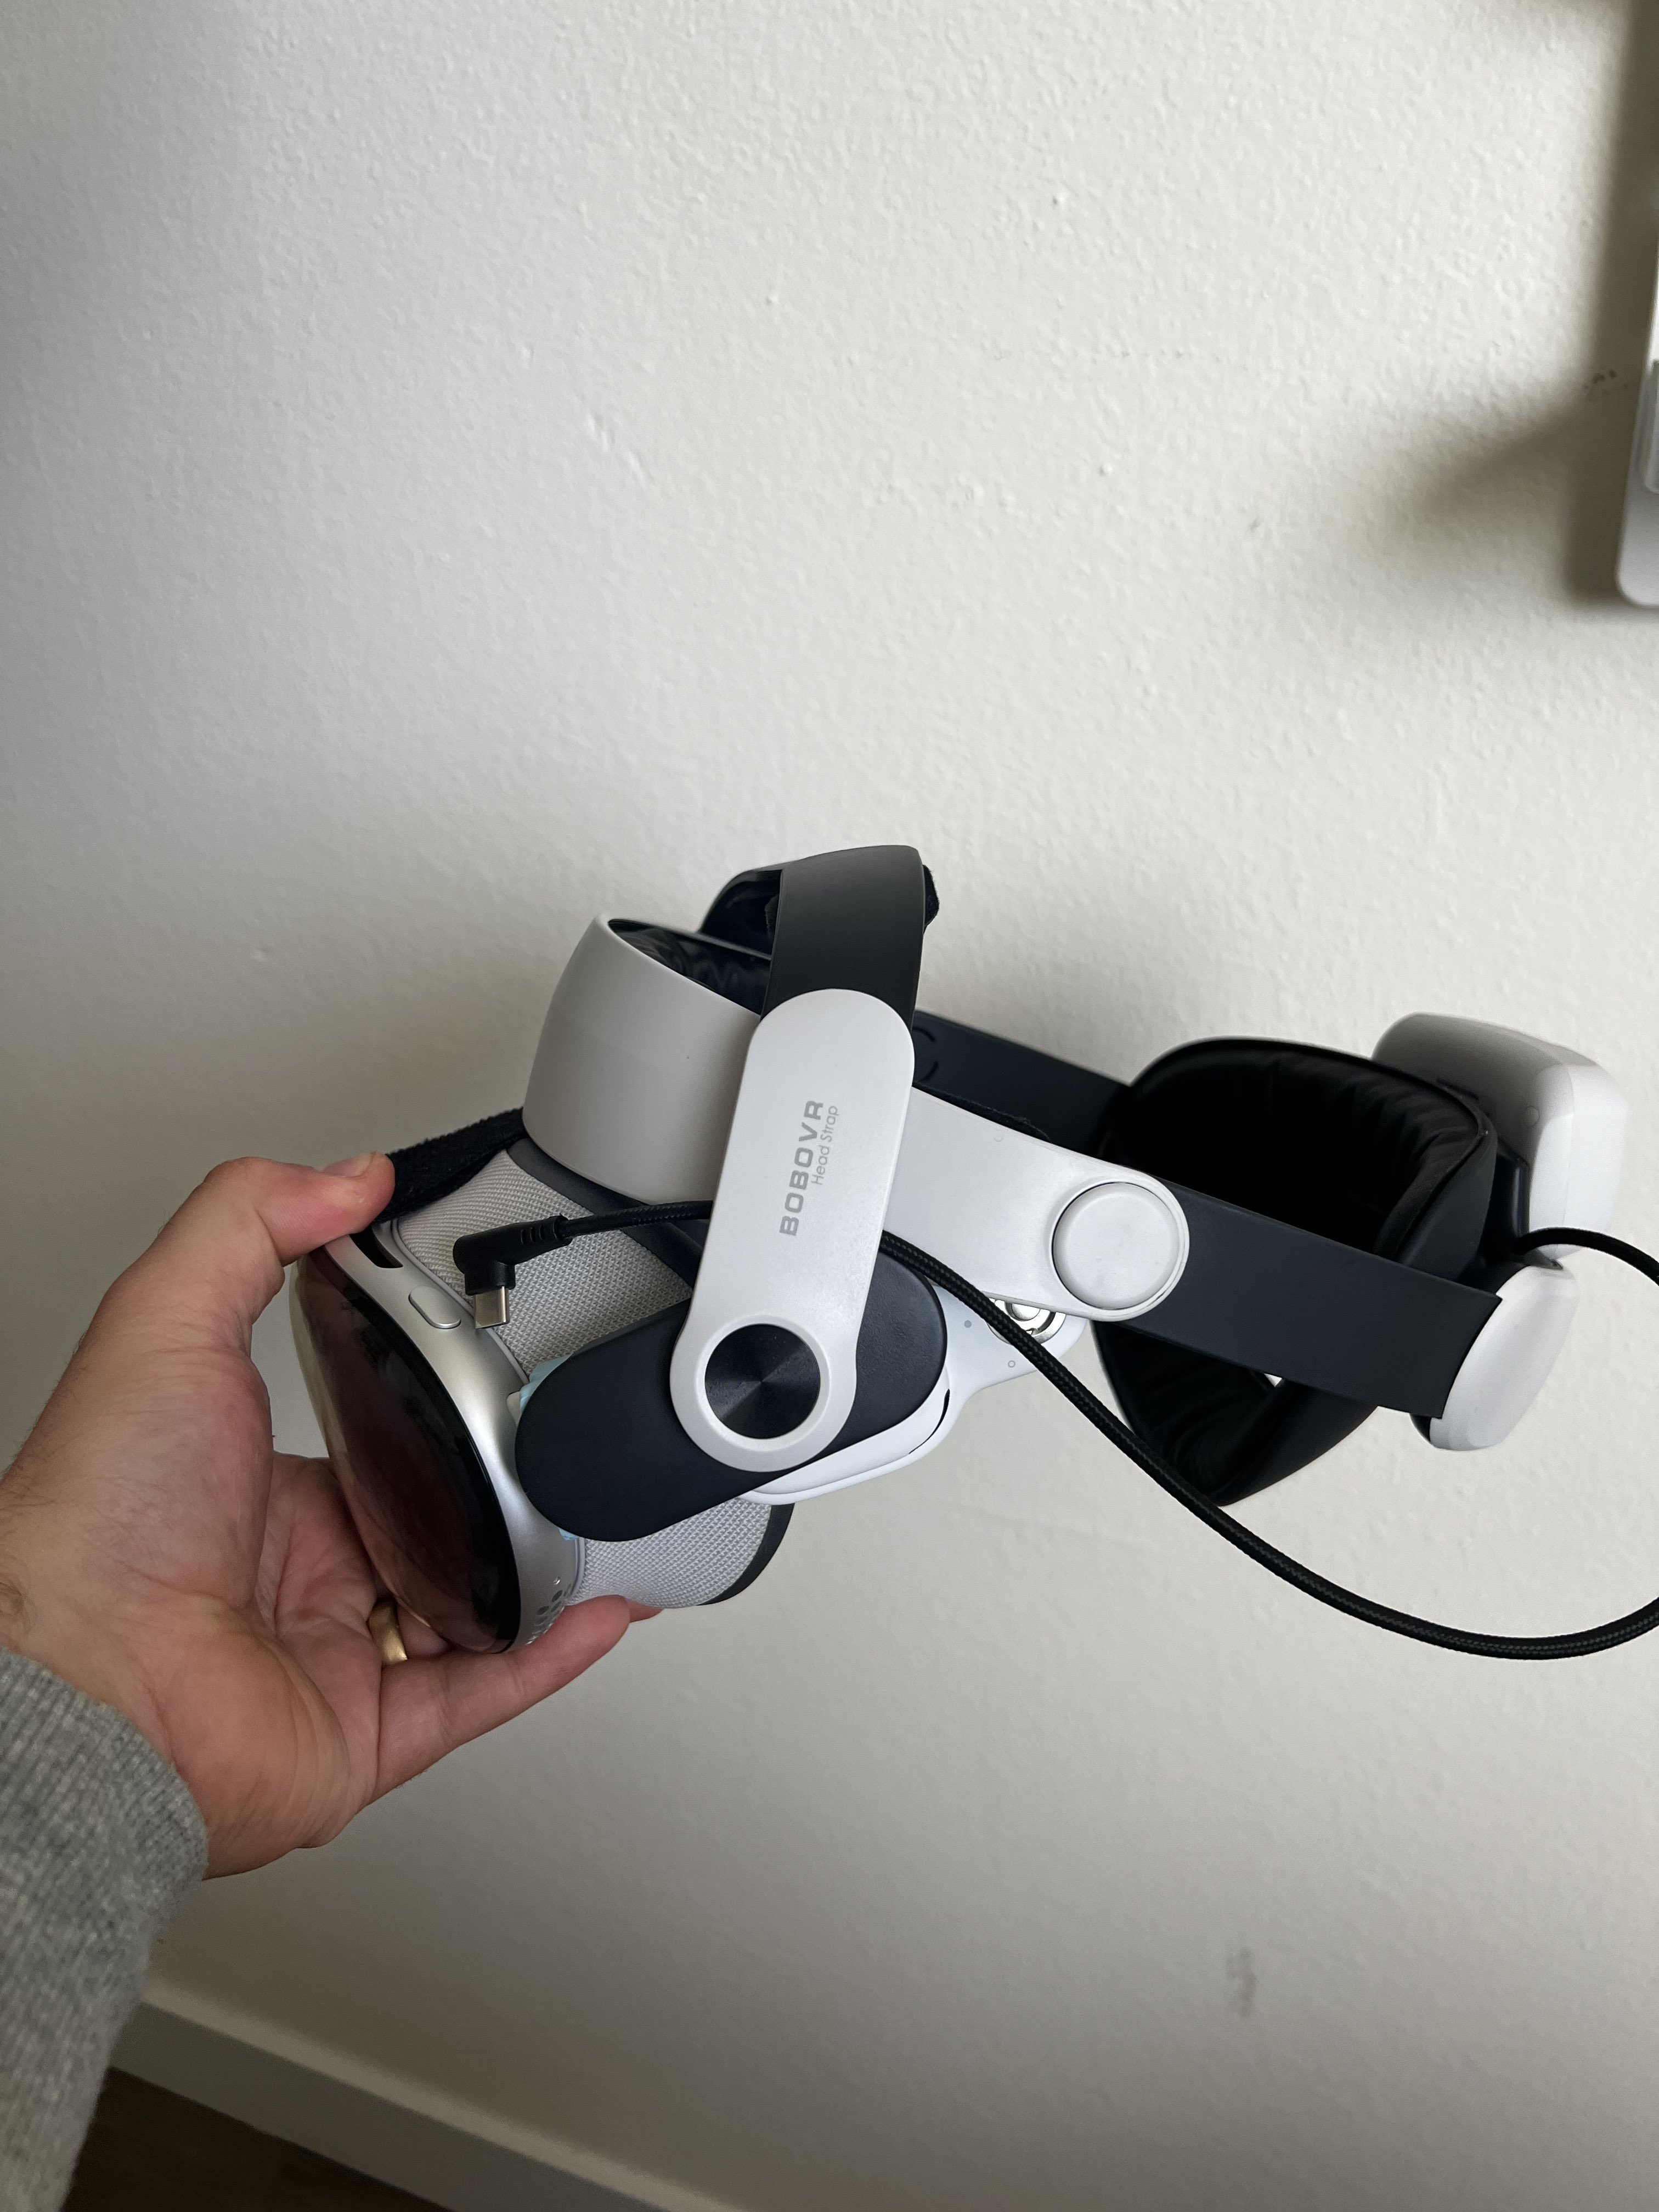 BOBOVR M3 Pro Head Strap with Battery Meta Quest 3 Unboxing and Setup 